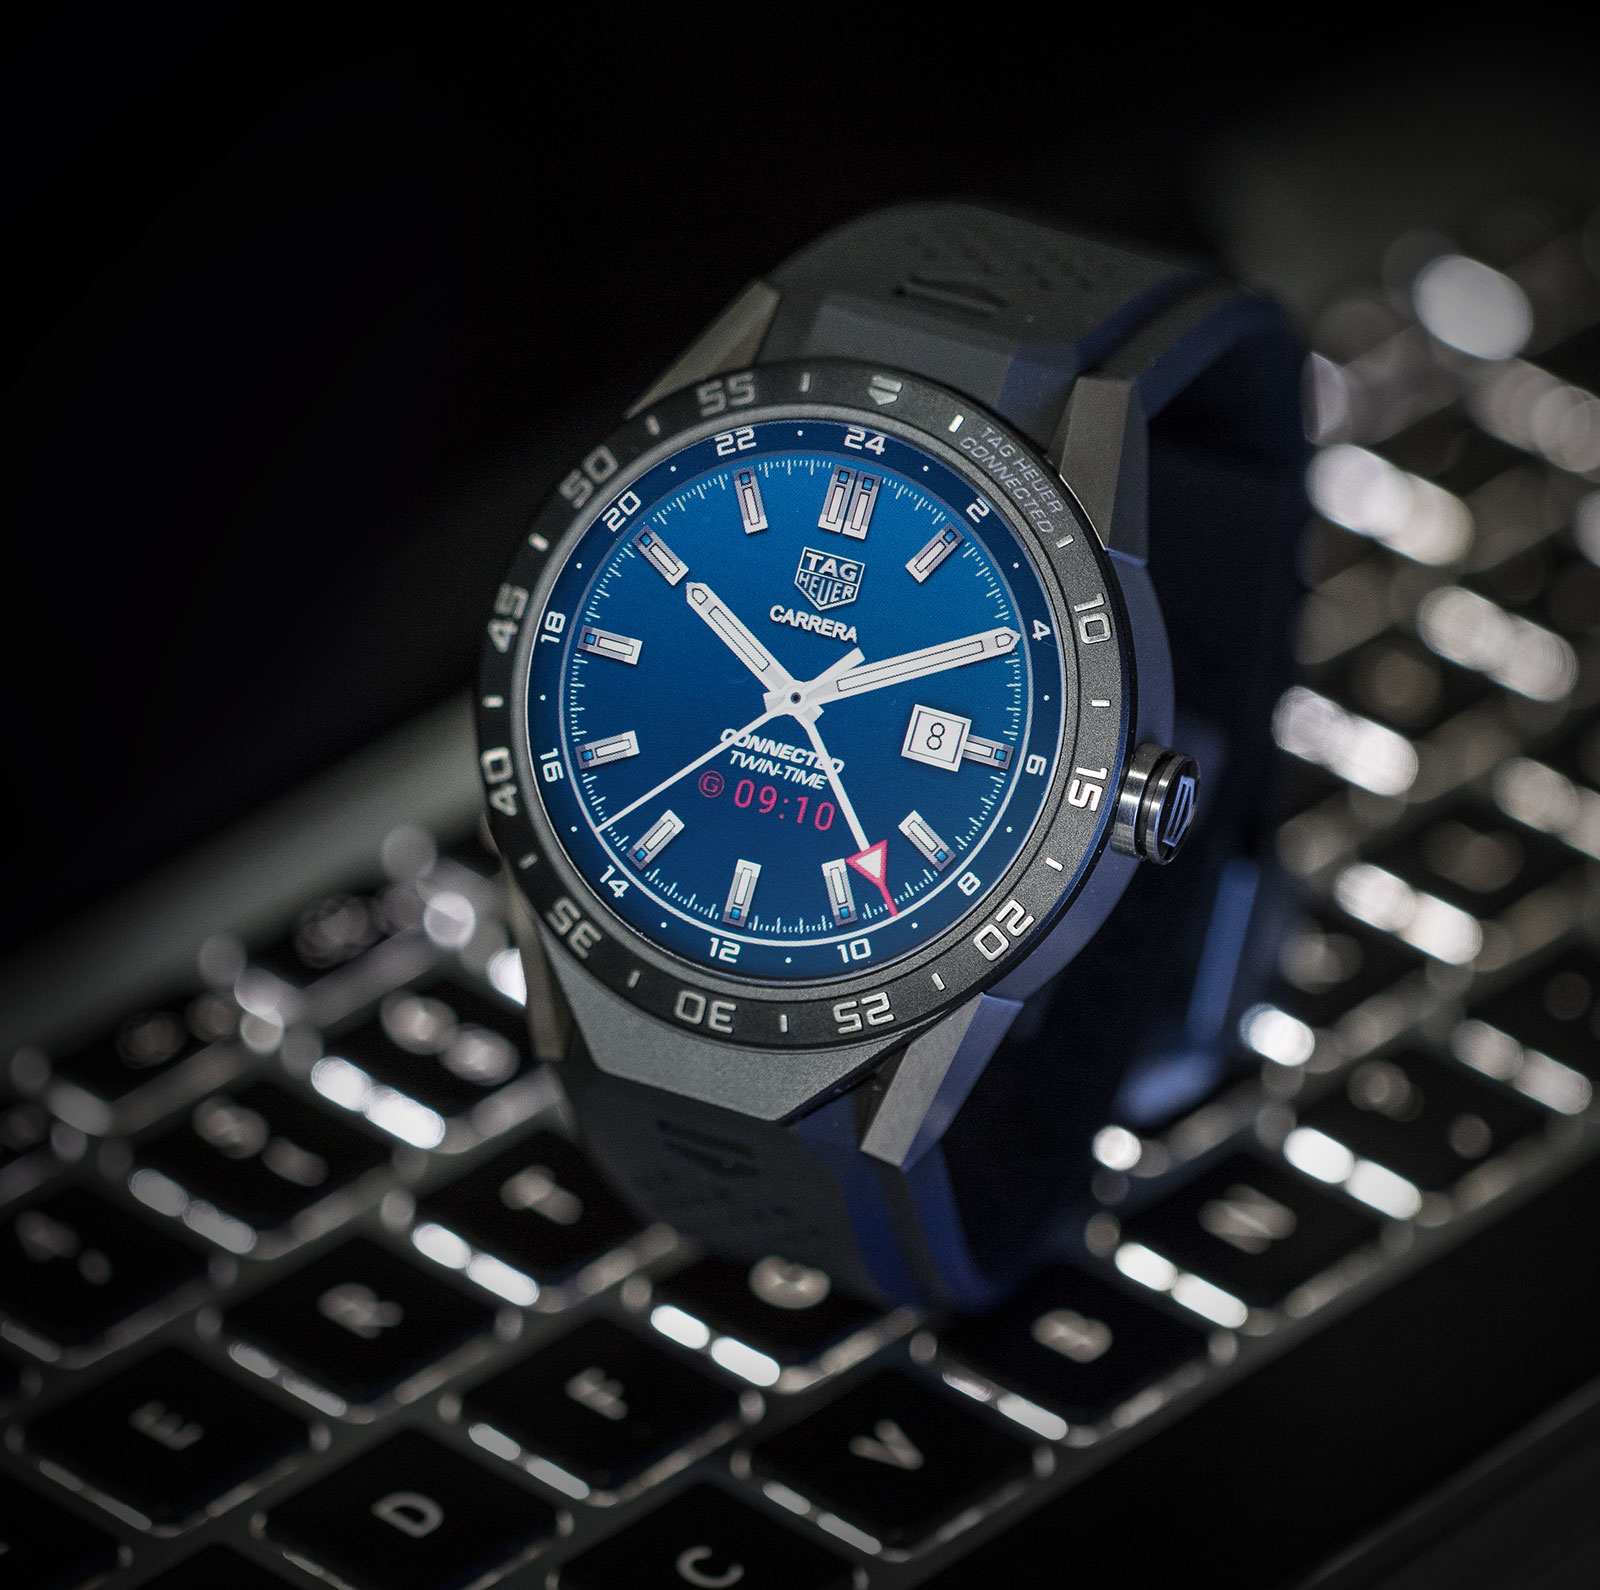 Tag Heuer Introduces Its First Smartwatch The 1500 Tag Heuer Connected Tag Heuer Has Just 